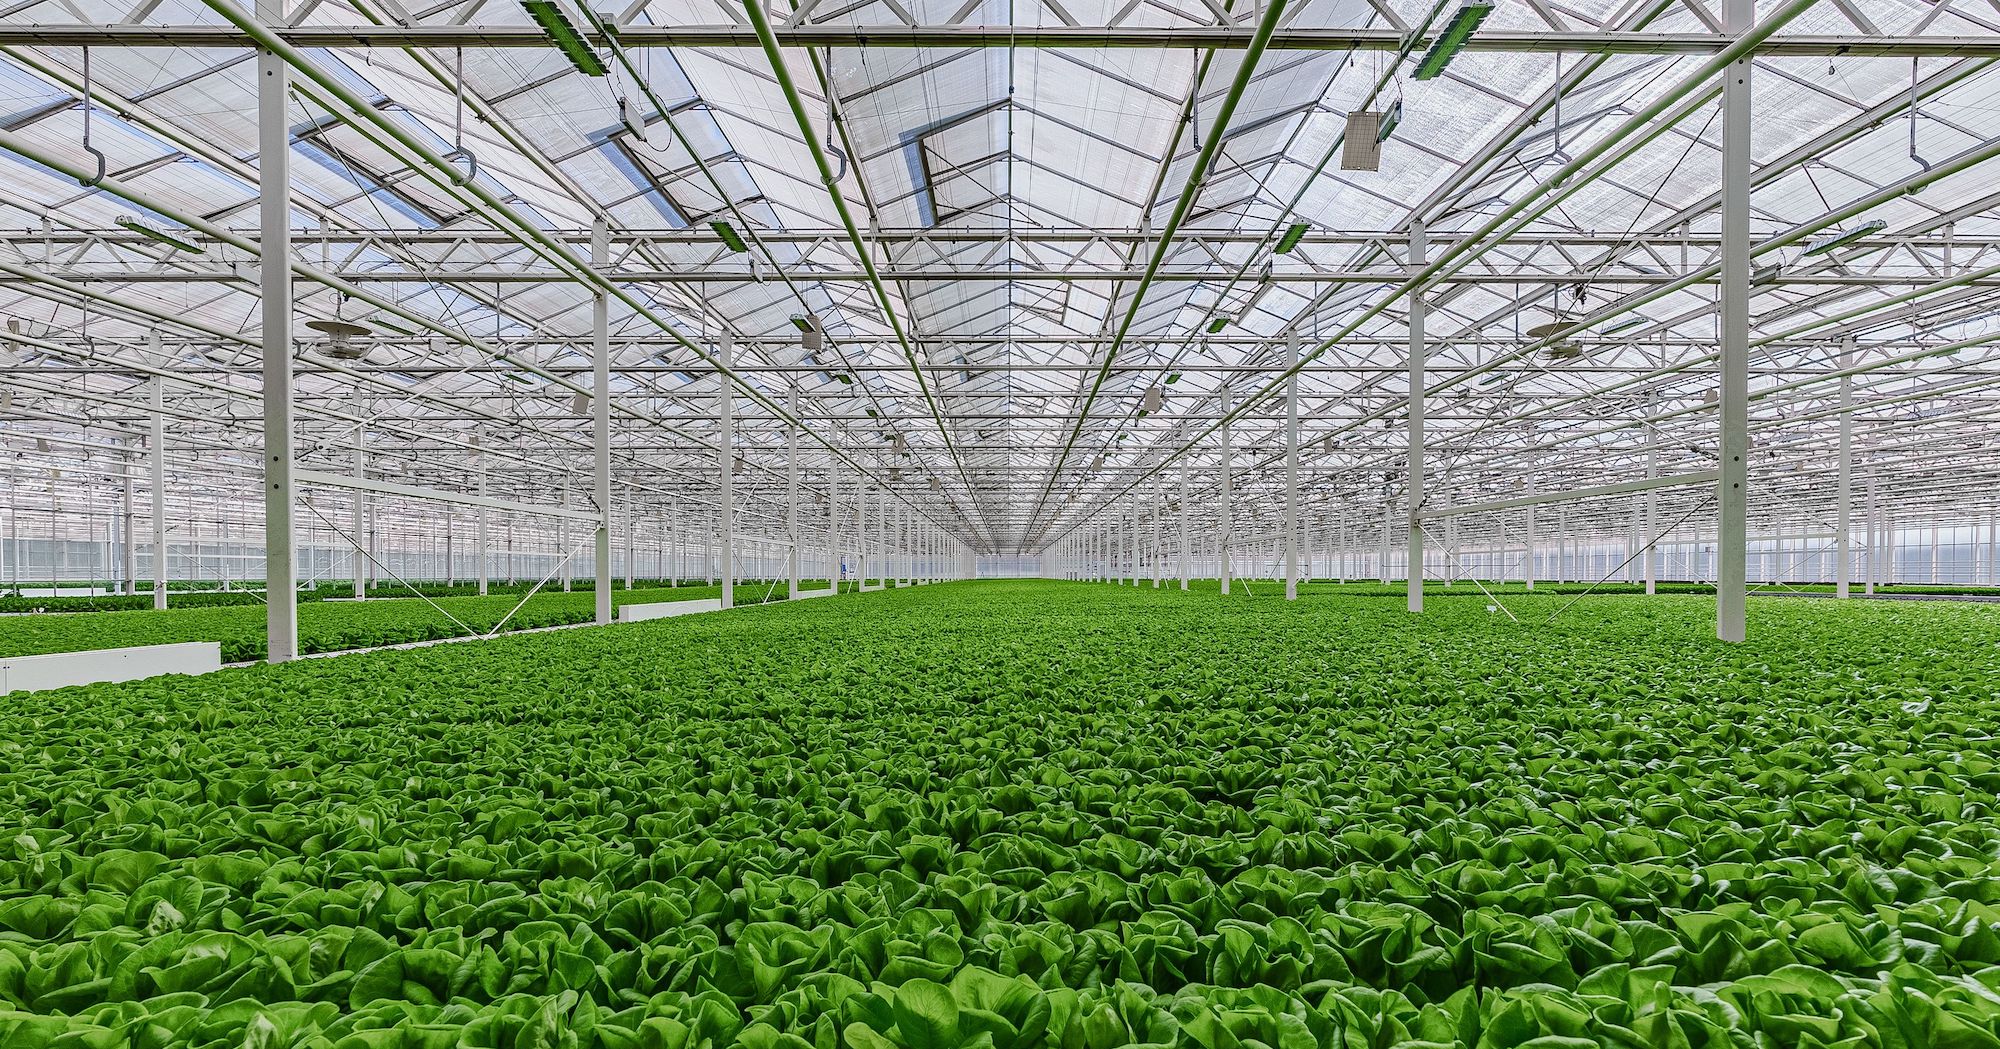 Gotham Greens is Redefining What's Possible in the Food System by